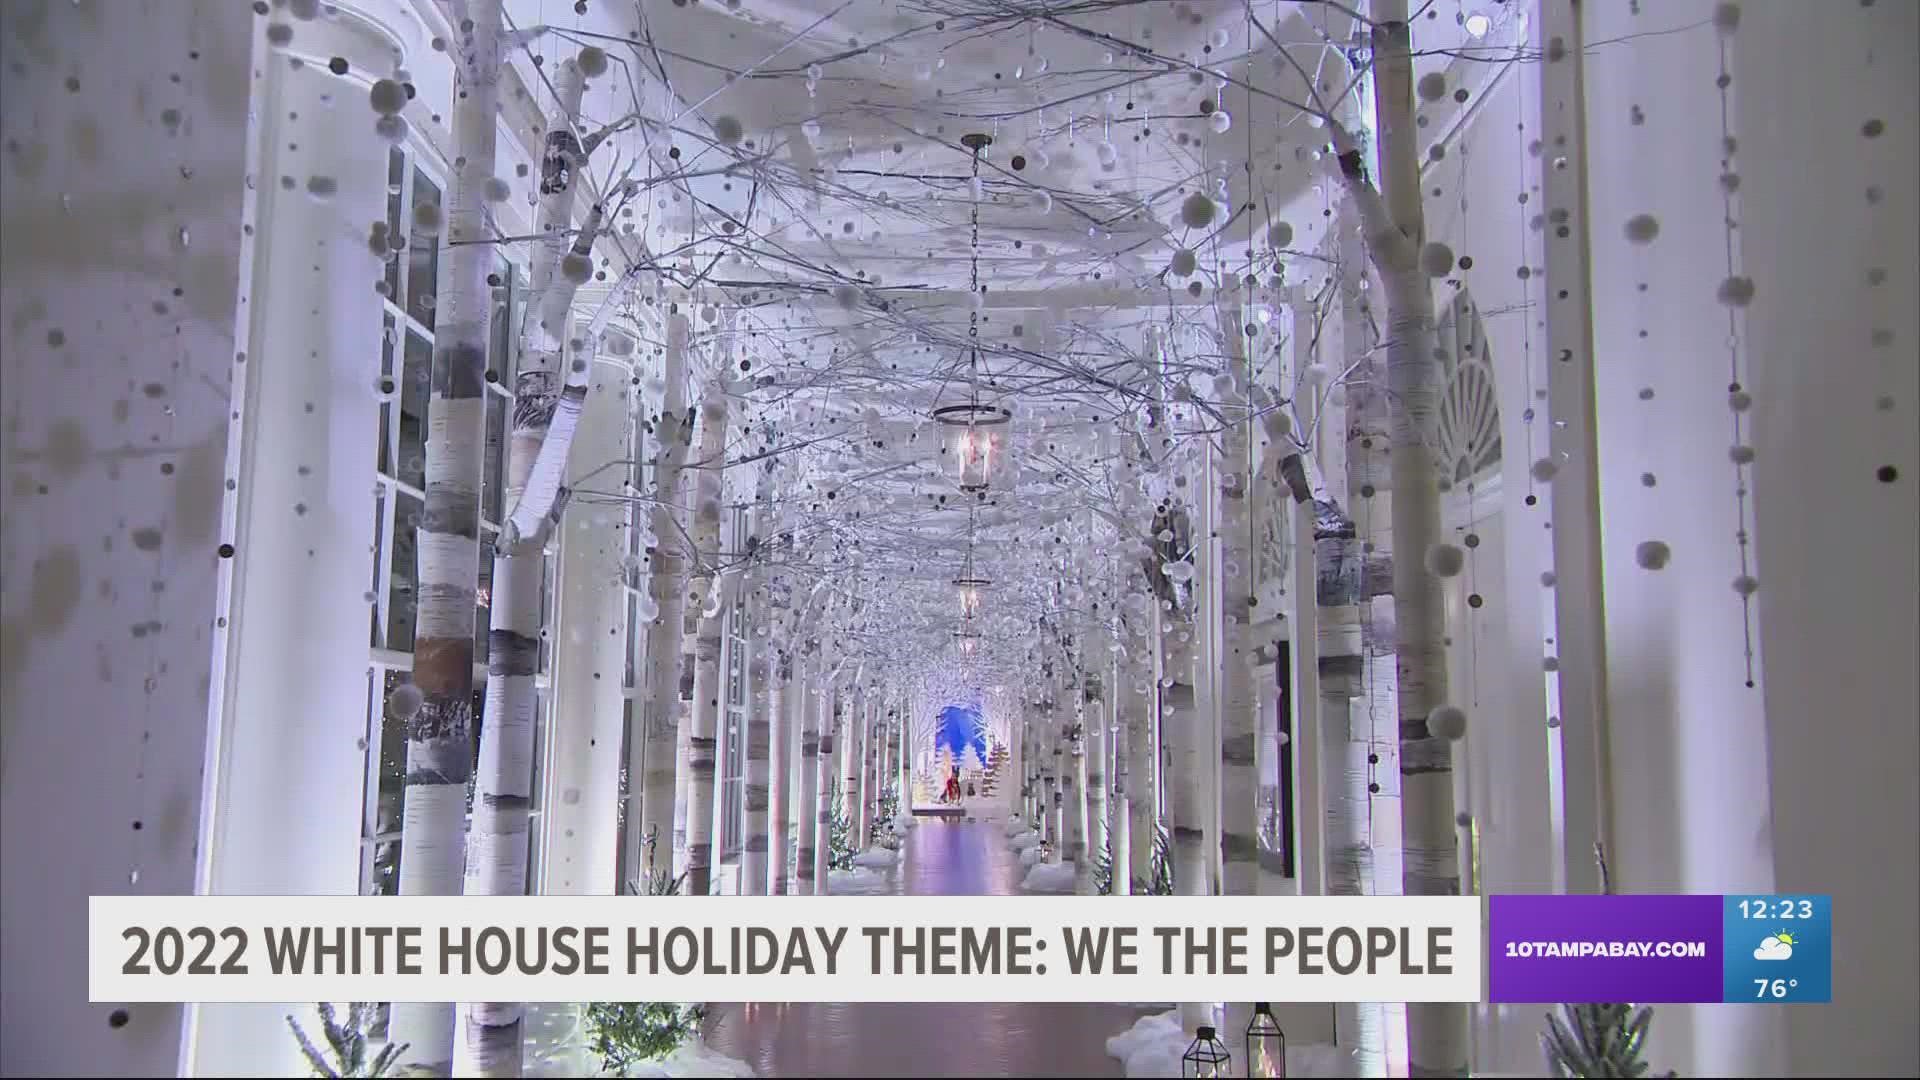 The decorations include more than 83,000 twinkling lights on trees, garlands, wreaths and other displays, 77 Christmas trees and 25 wreaths.